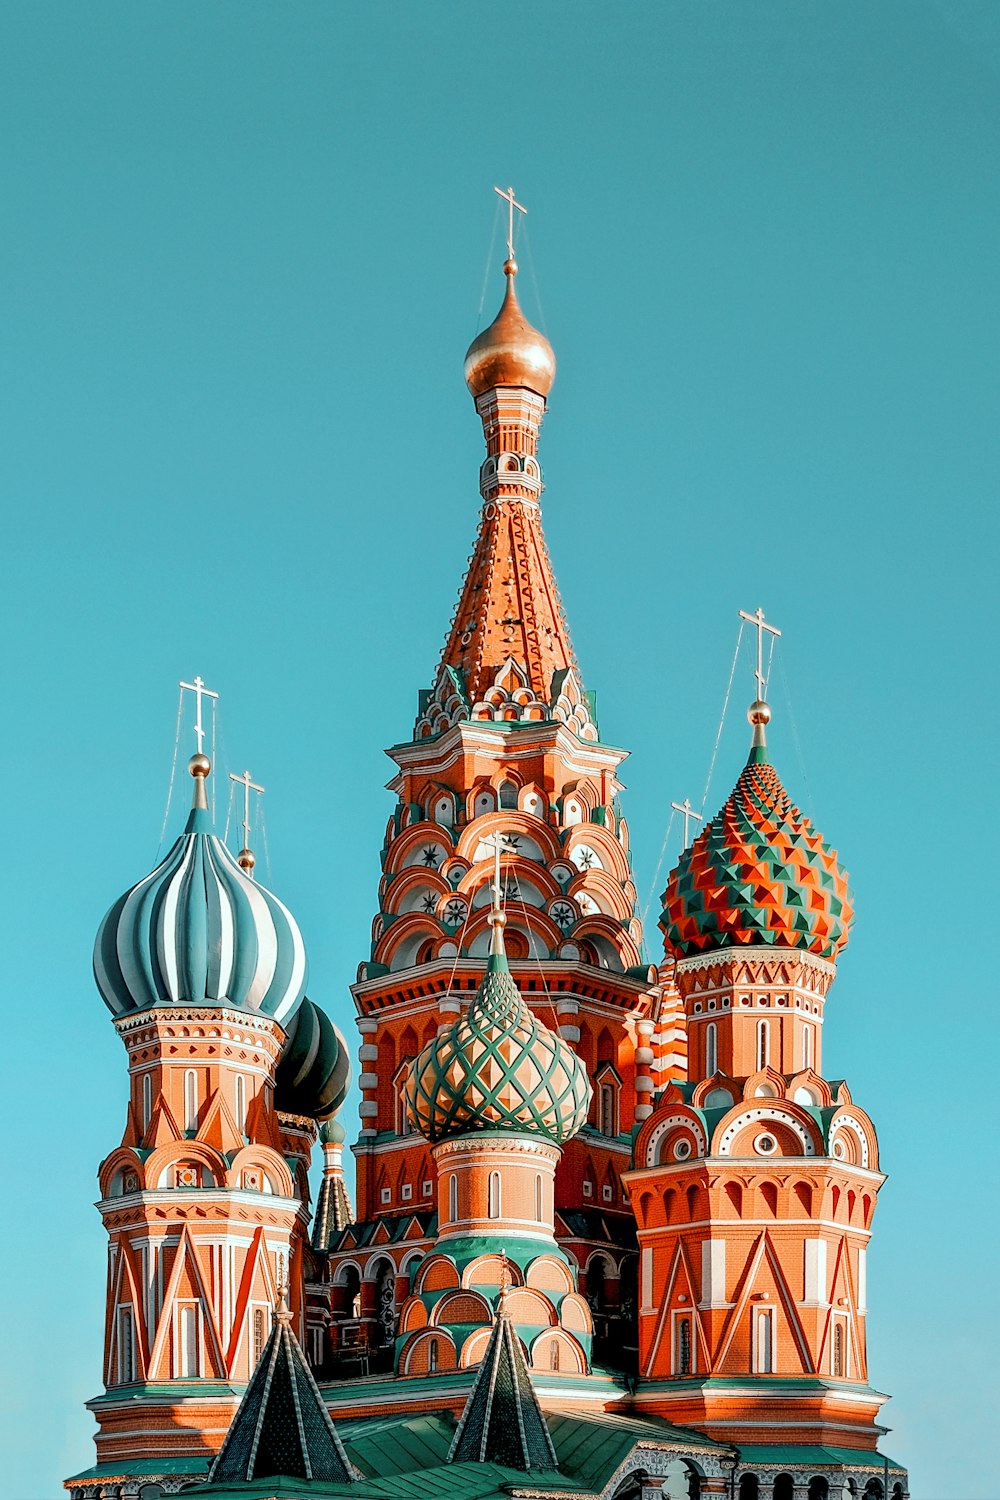 Saint Basil's Cathedral with colorful domes